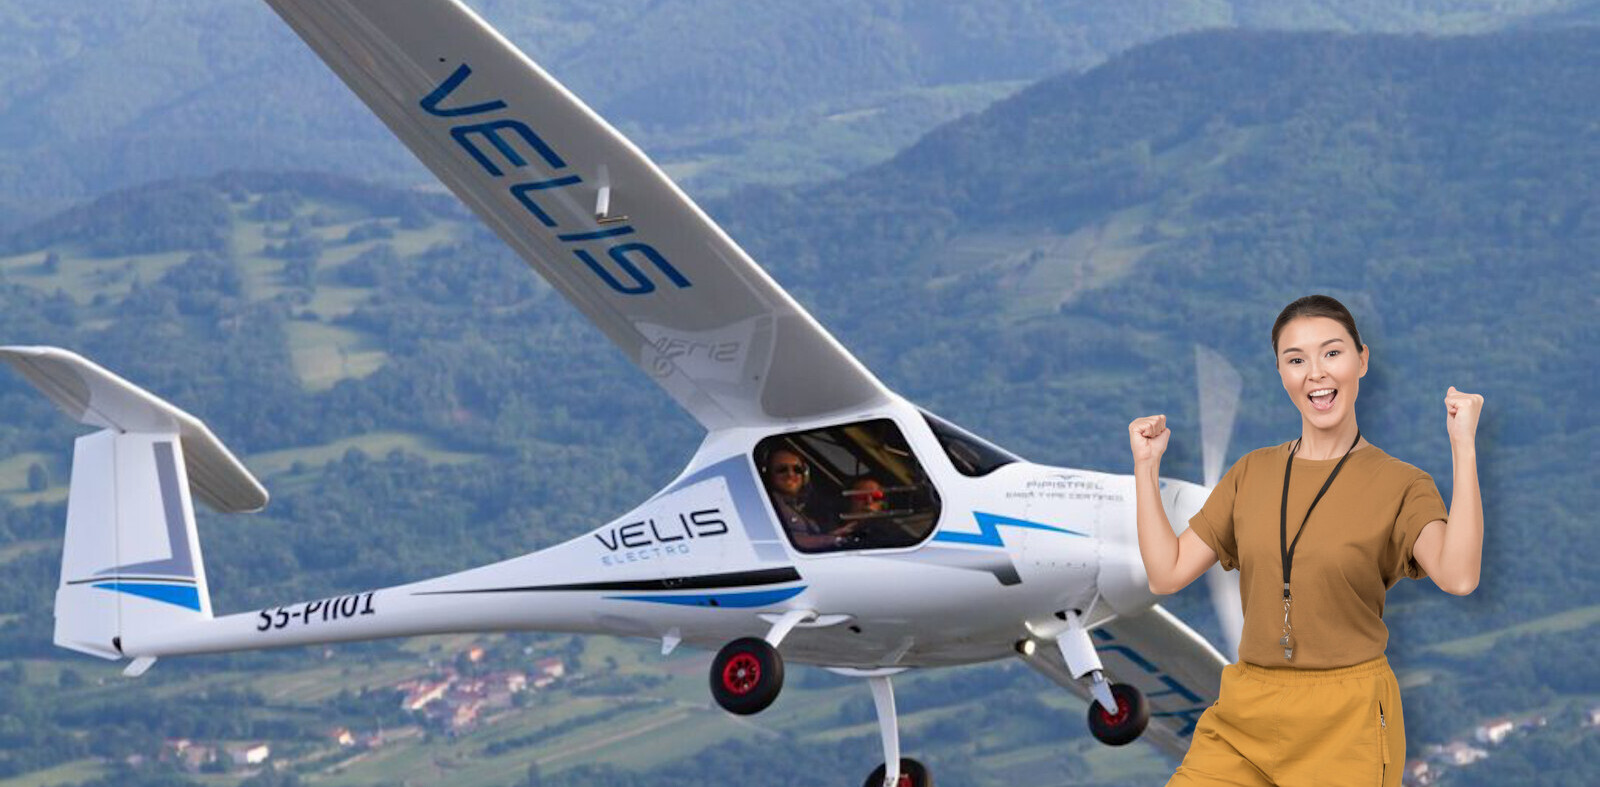 This tiny electric plane from a company you’ve never heard of is actually a BIG deal for aviation